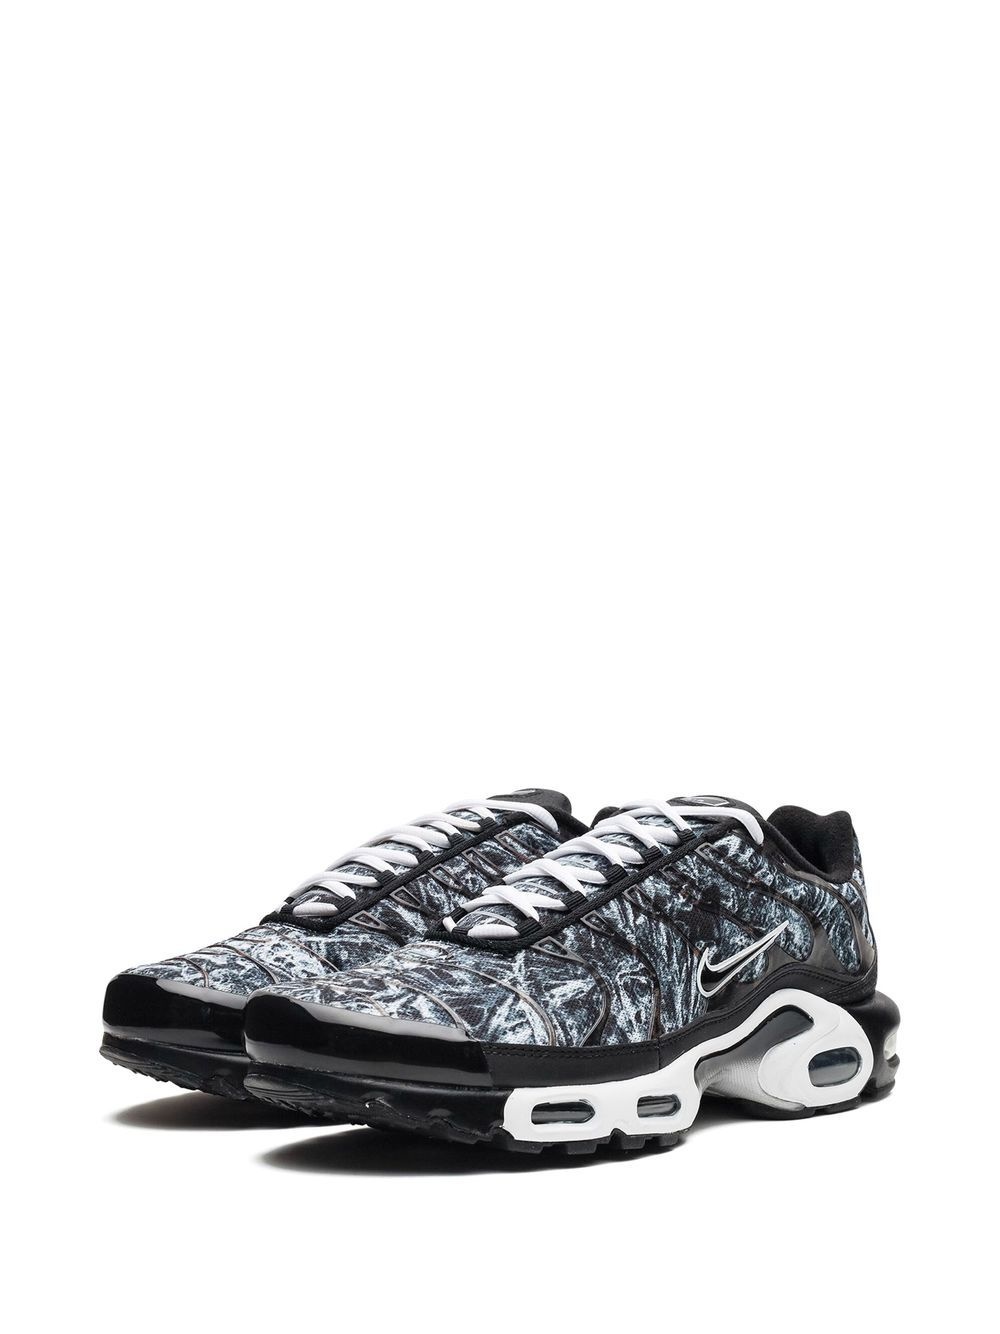 Air Max Plus AMP "Shattered Ice" sneakers - 5